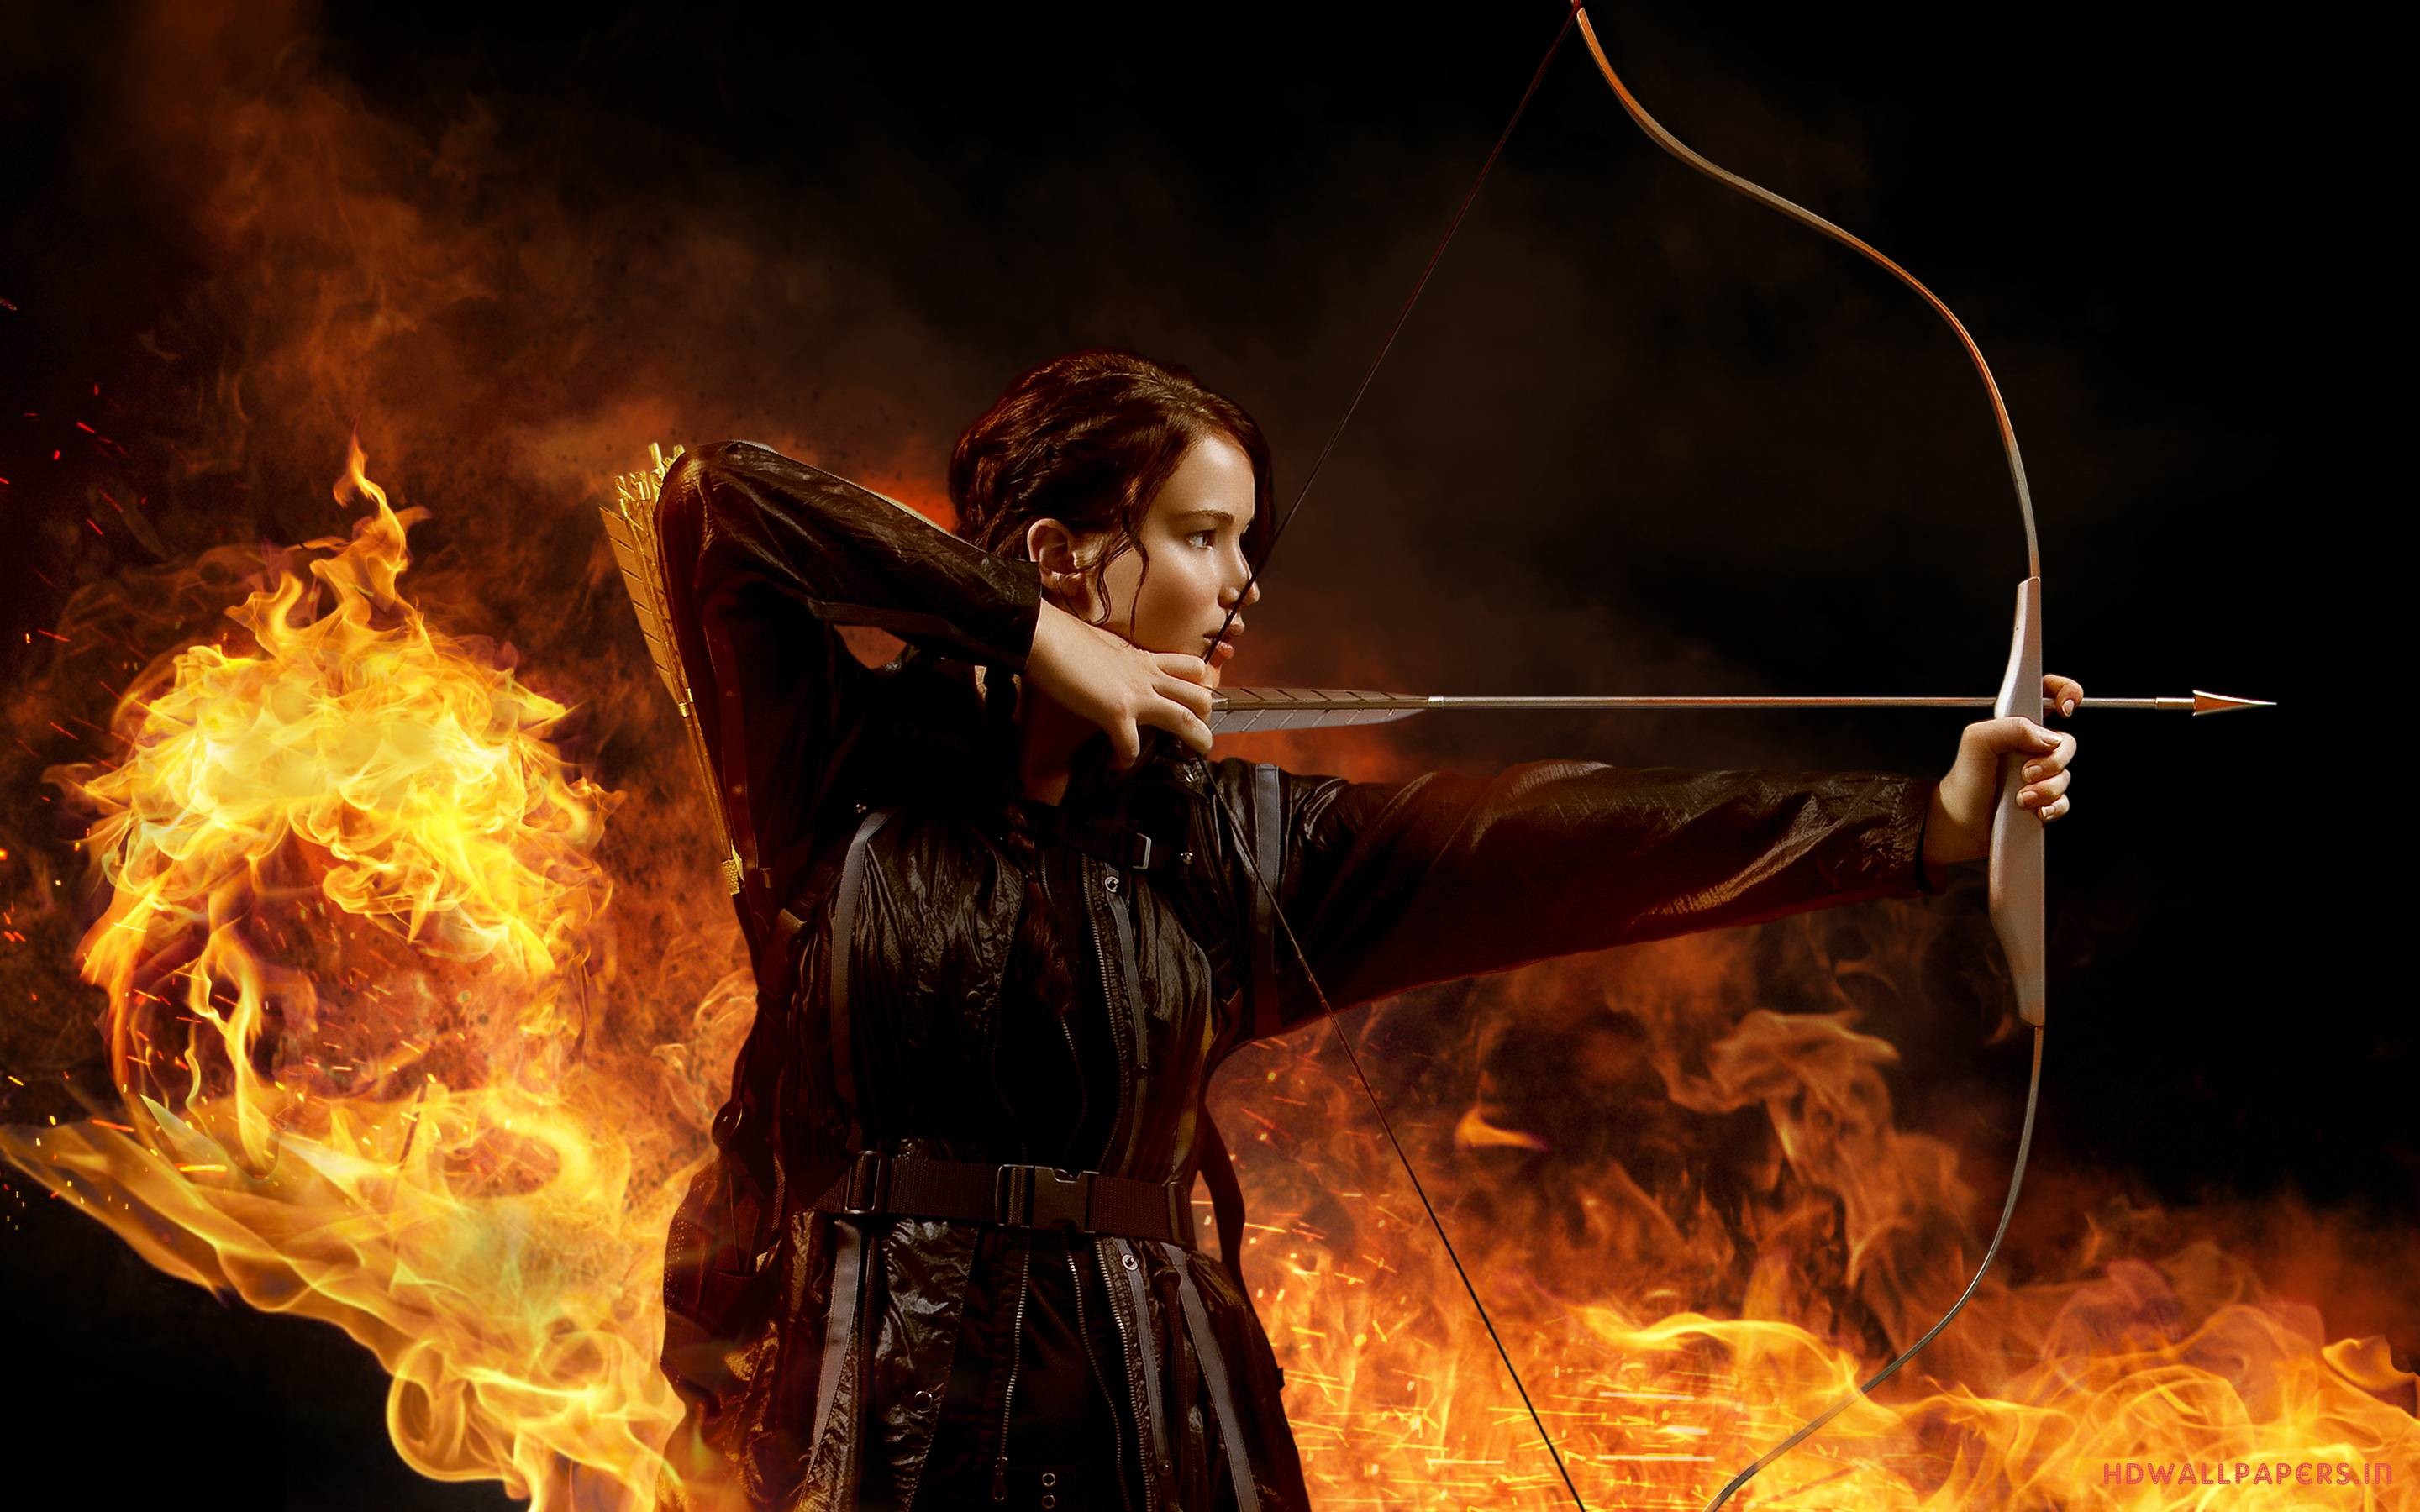 The Hunger Games: Mockingjay, Part 1 now available On Demand!